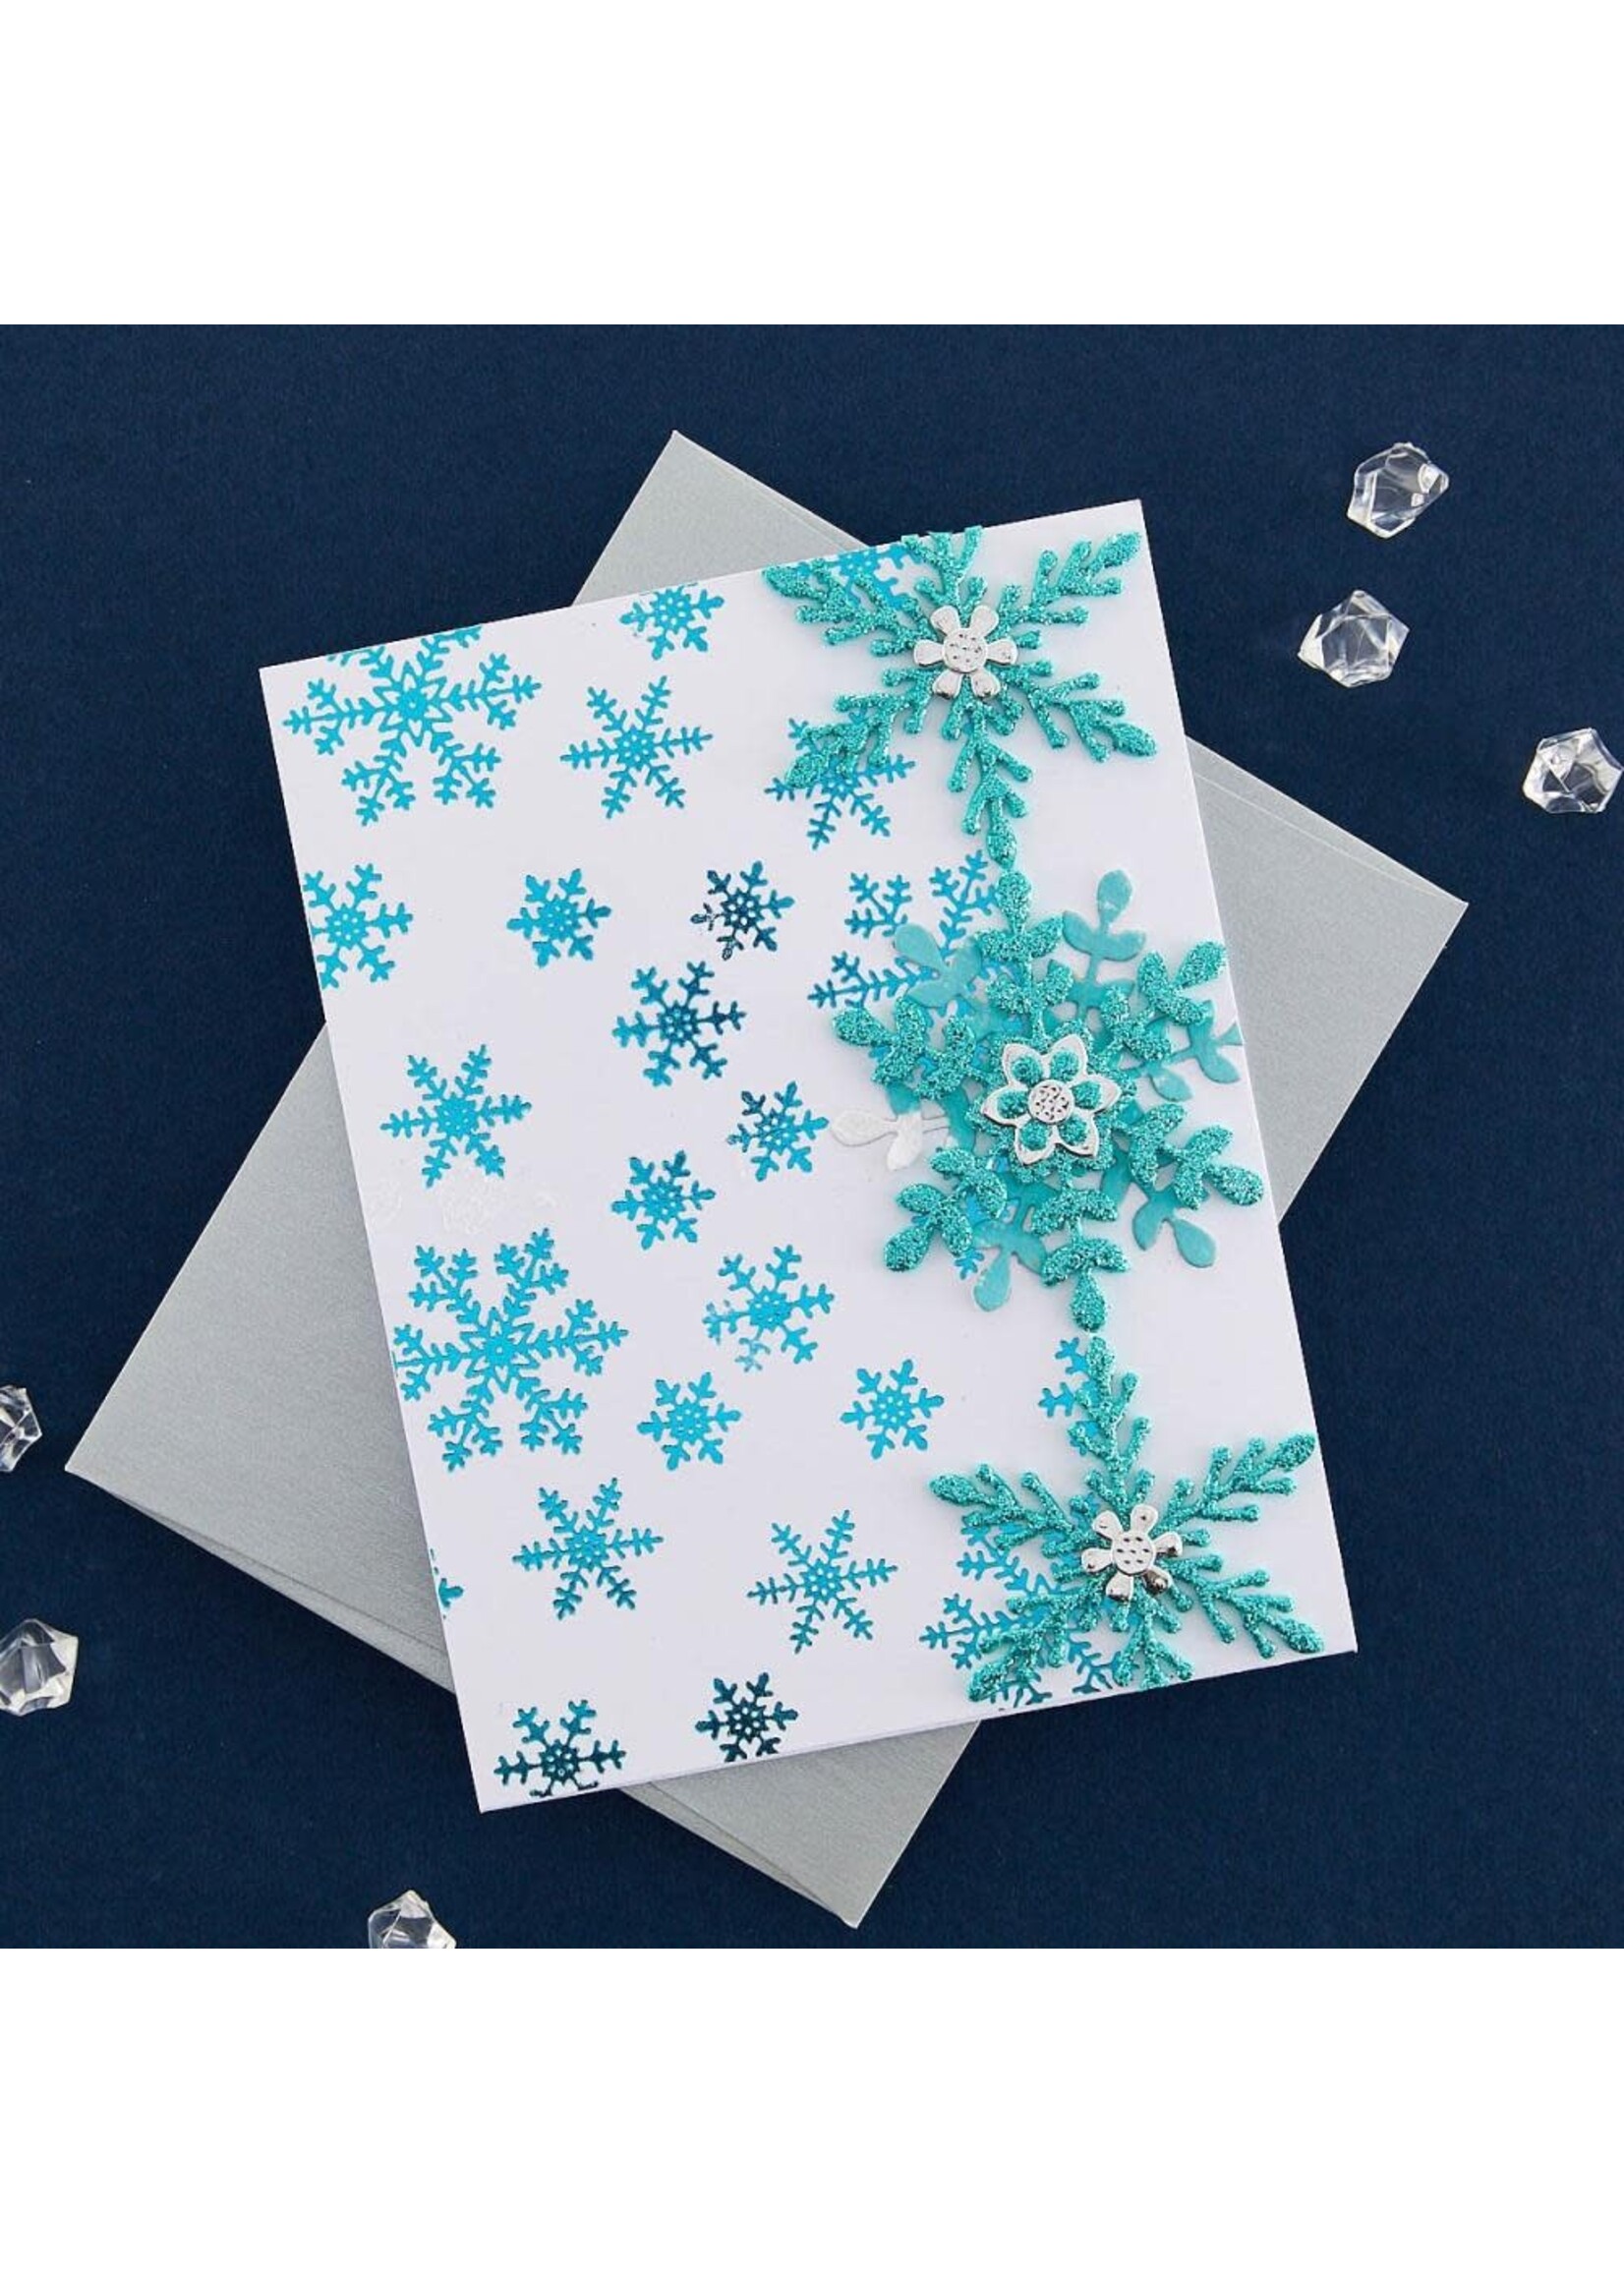 SPELLBINDERS PAPERCRAFTS, INC Hot Foil Plate - Glimmering Snowflakes